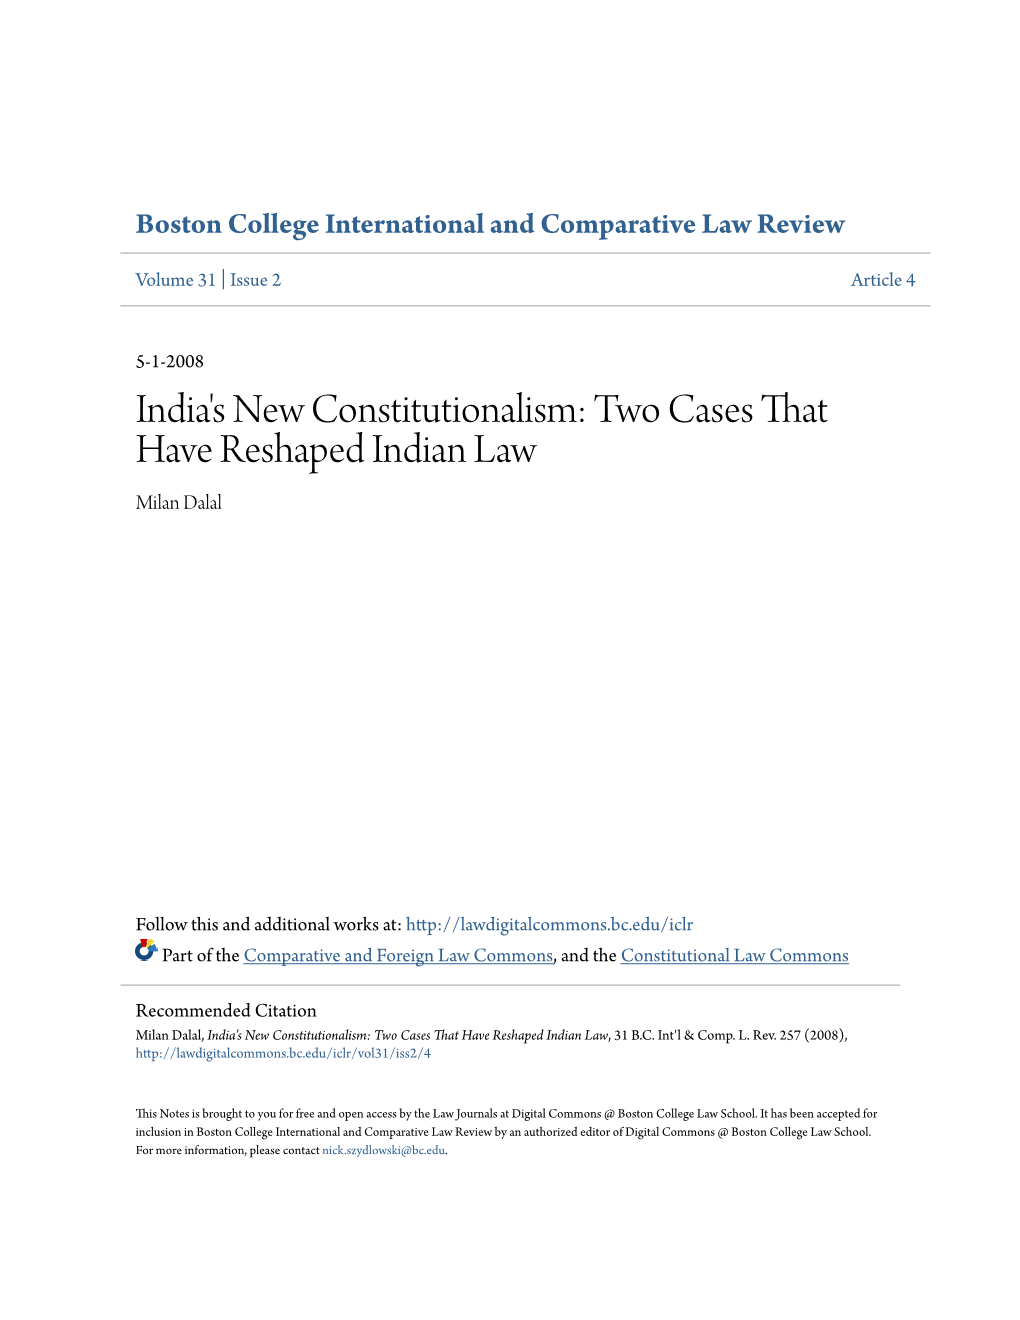 India's New Constitutionalism: Two Cases That Have Reshaped Indian Law Milan Dalal